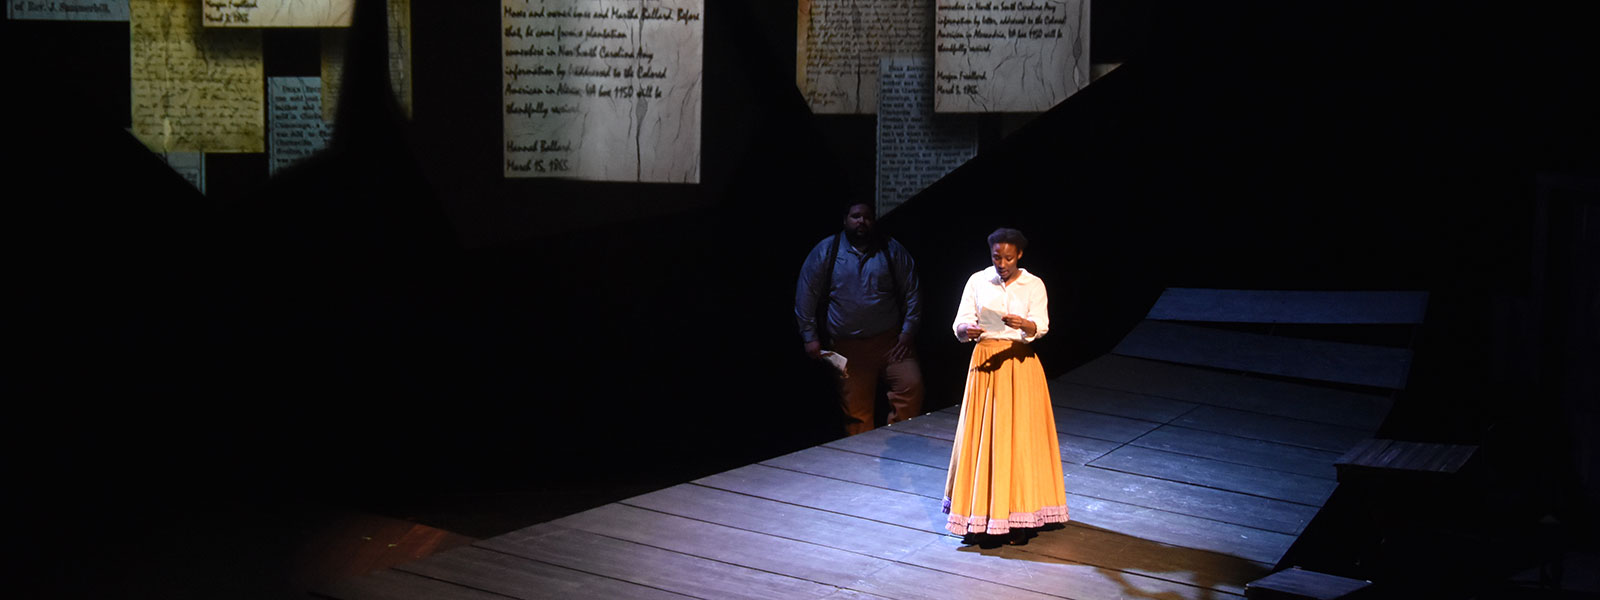 "Torn Asunder" at St. Louis Black Rep, 2018, co-commissioned and with lighting design by Perkins